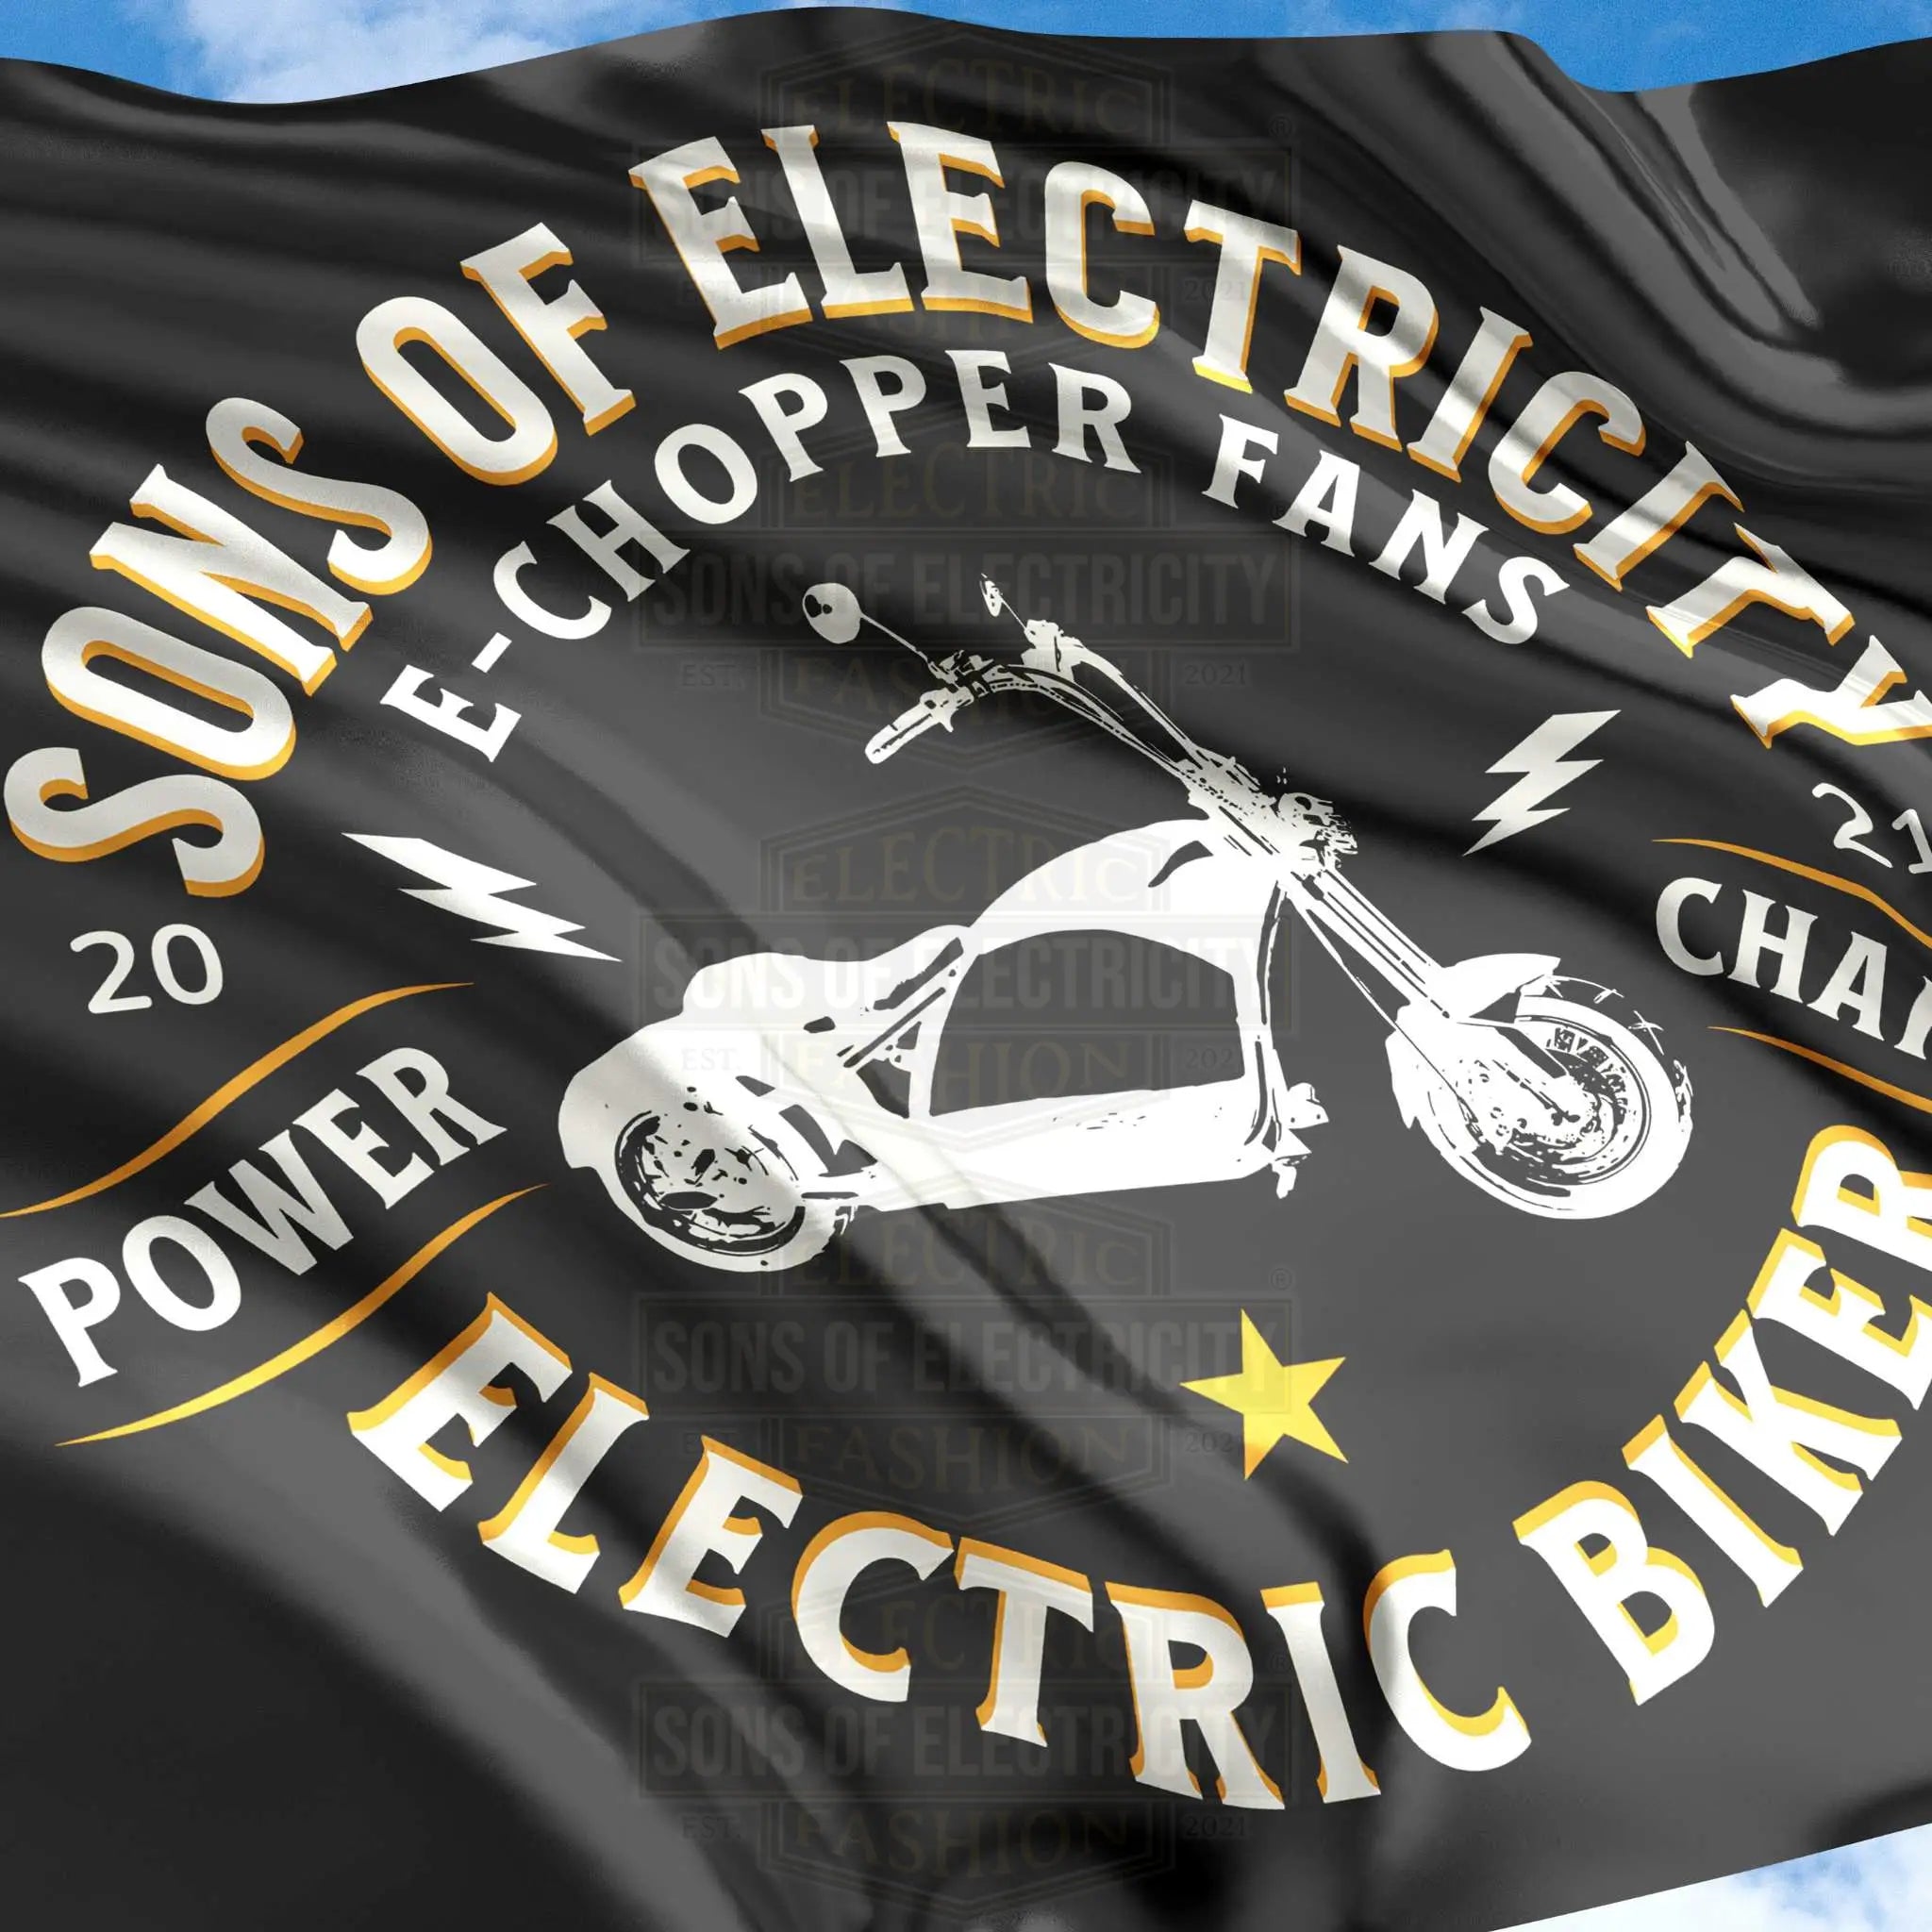 SONS OF ELECTRICITY Hiss-Fahne - E-Chopper (1) Fans Electric